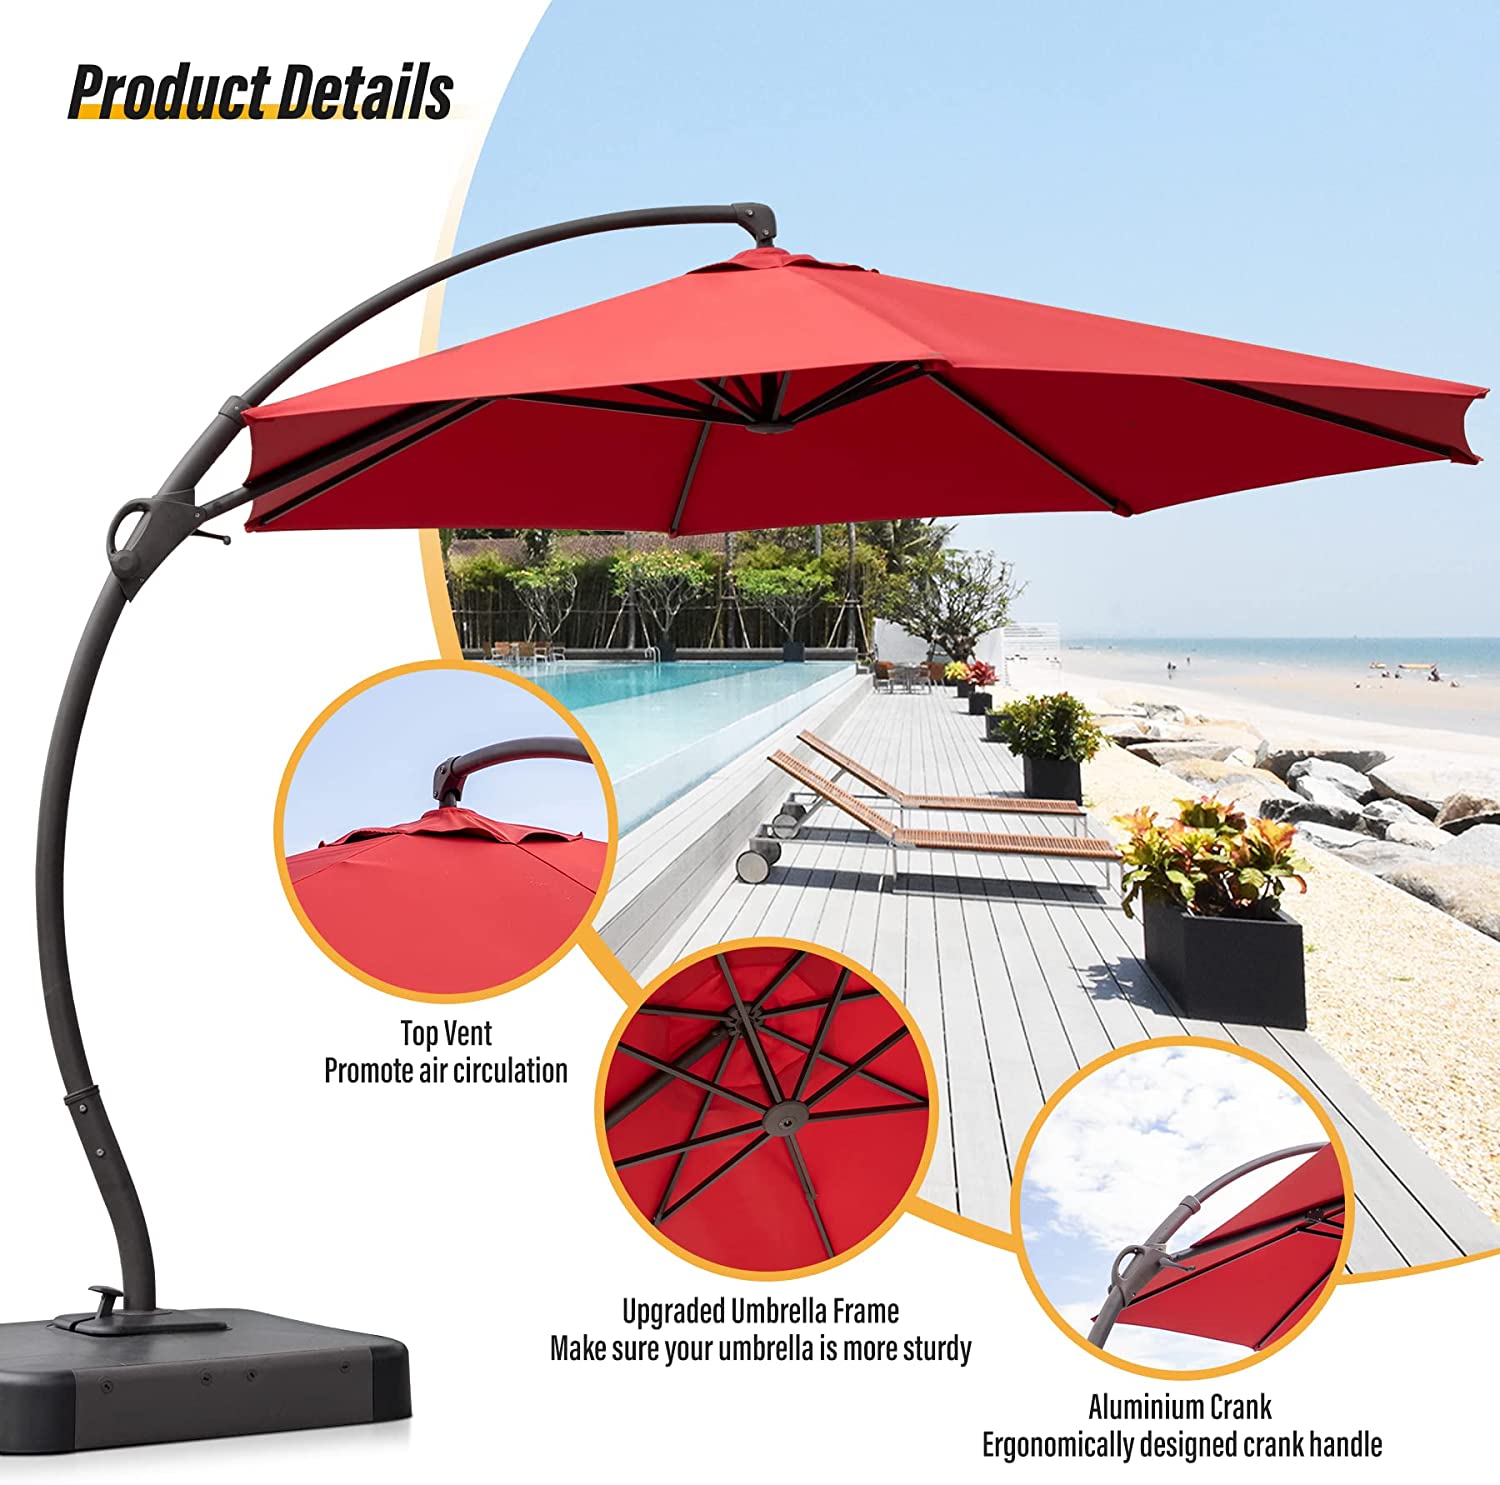 LAUSAINT HOME 12 FT Updated Outdoor Cantilever Umbrella